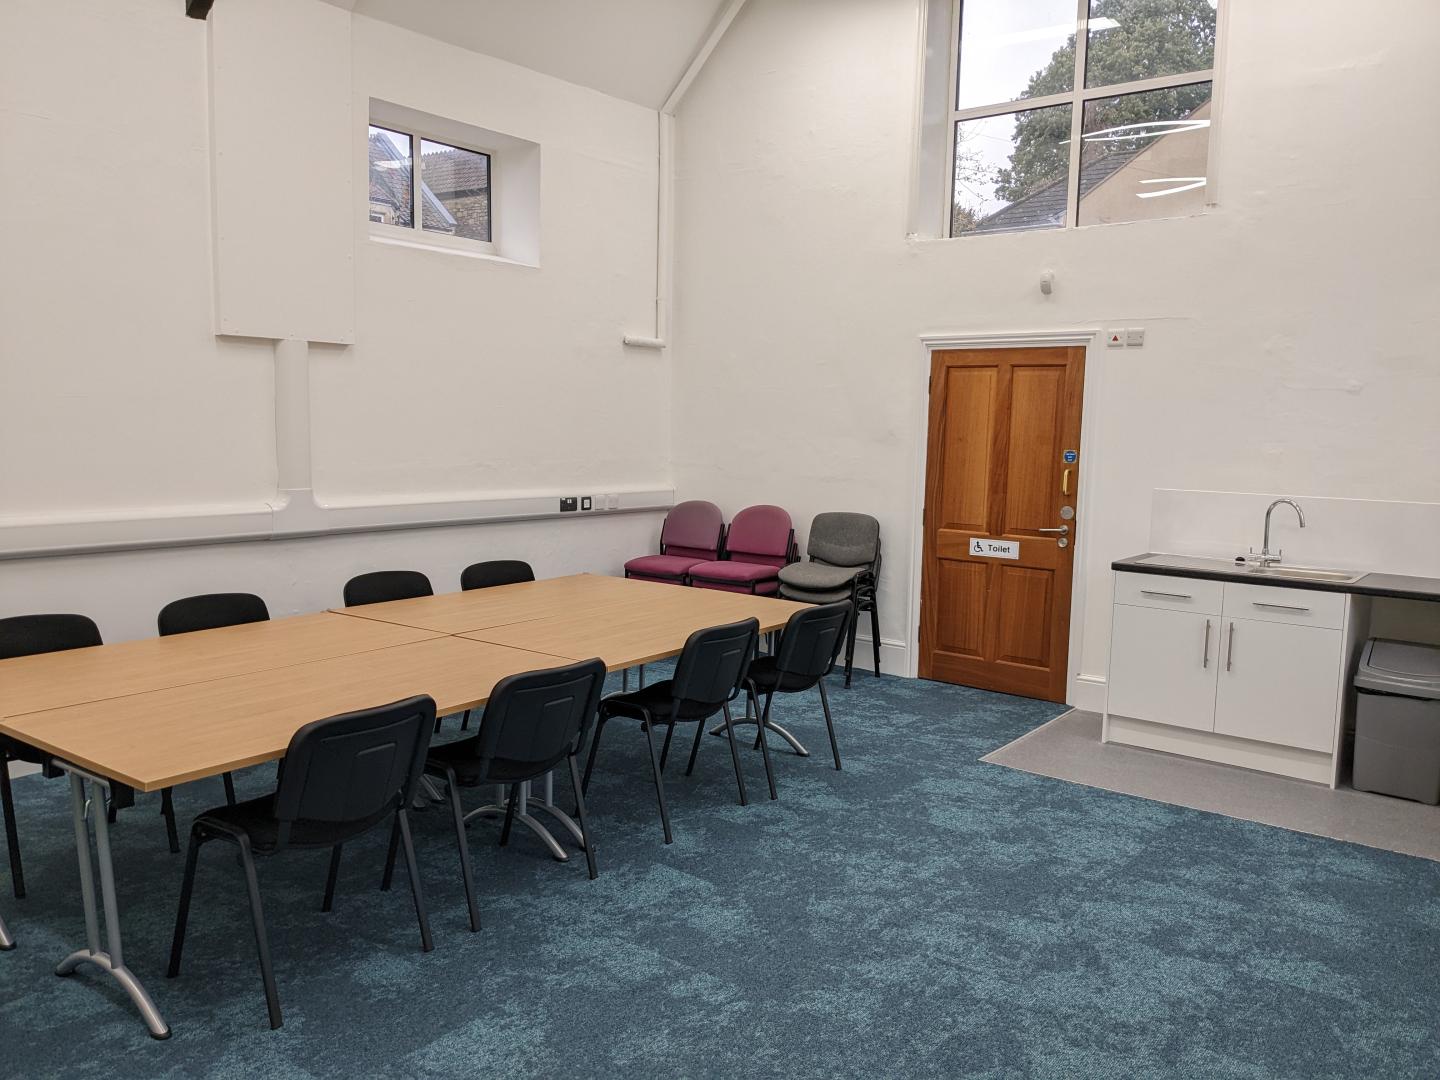 An interior of a meeting room with a table in the centre surrounded by black chairs. There is a sink in the corner of the room and a door to a disabled toilet.